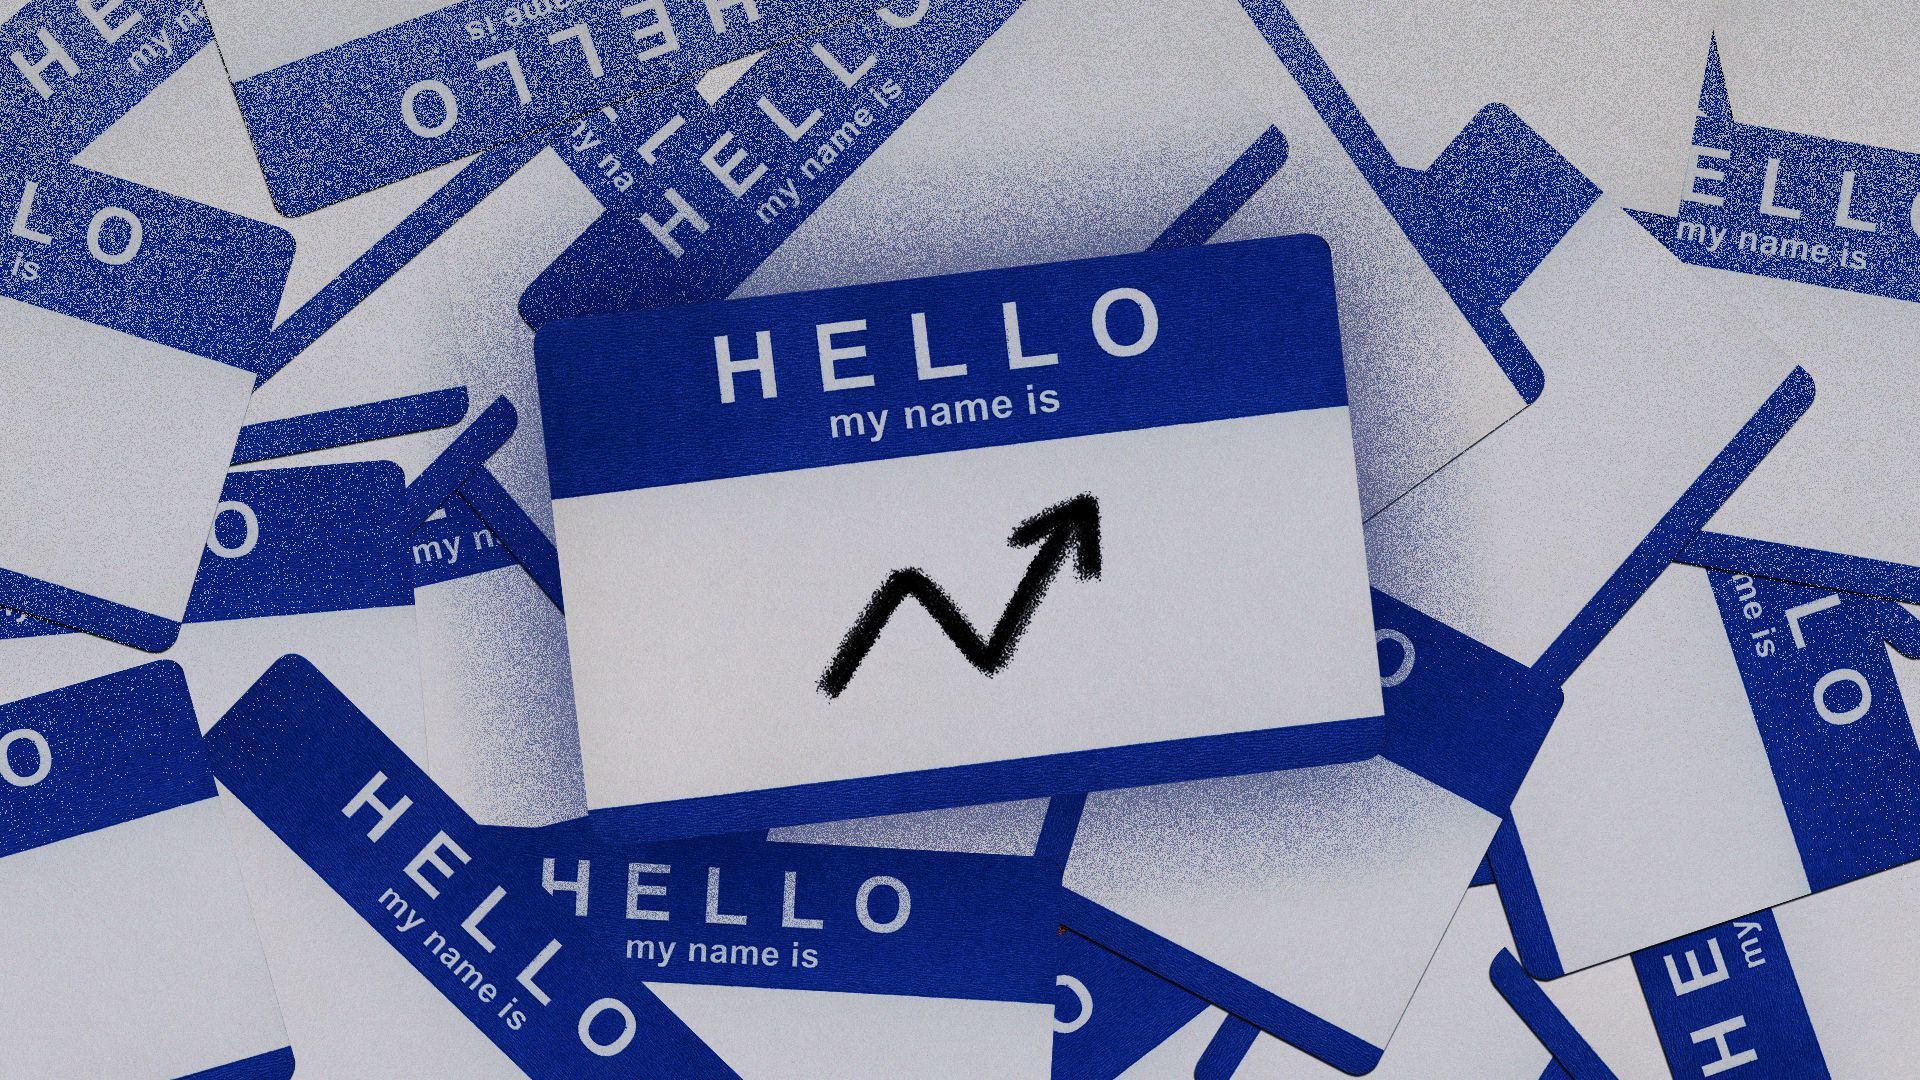 Illustration of many "hello my name is" stickers, and one has an upward trending arrow on it. 